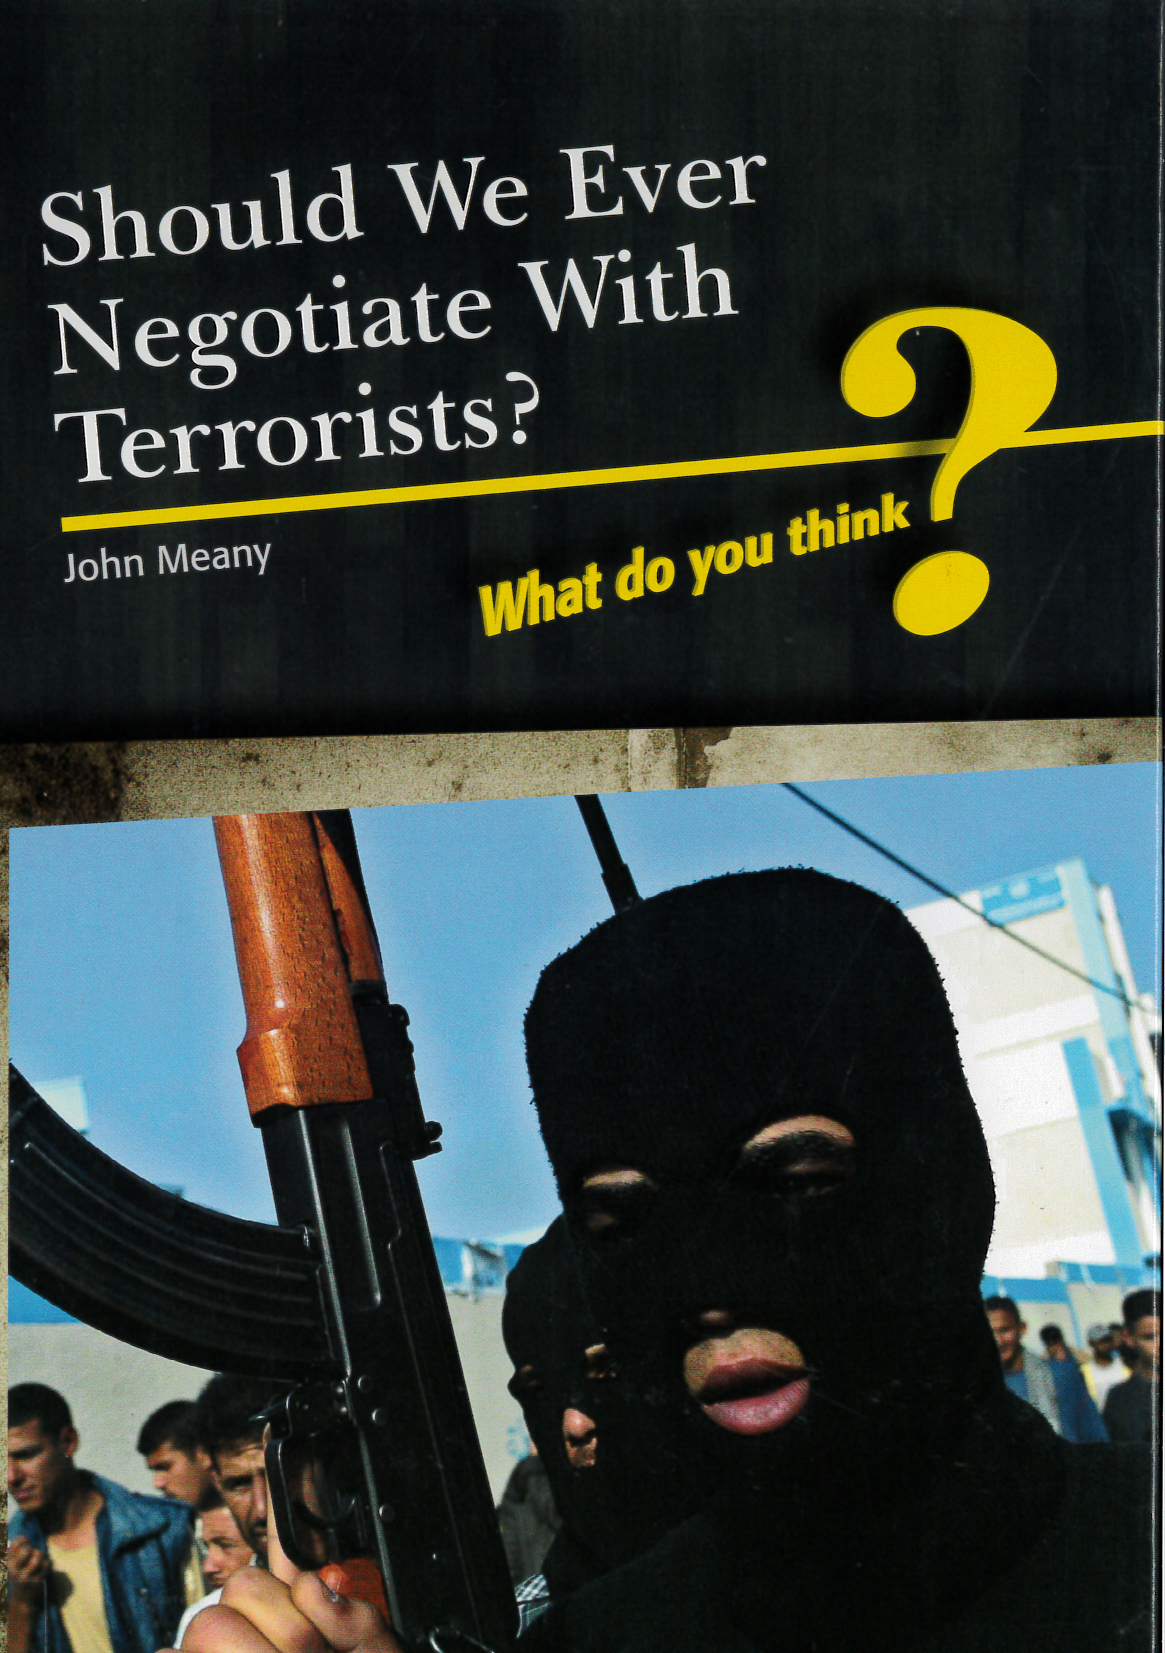 Should we ever negotiate with terrorists?